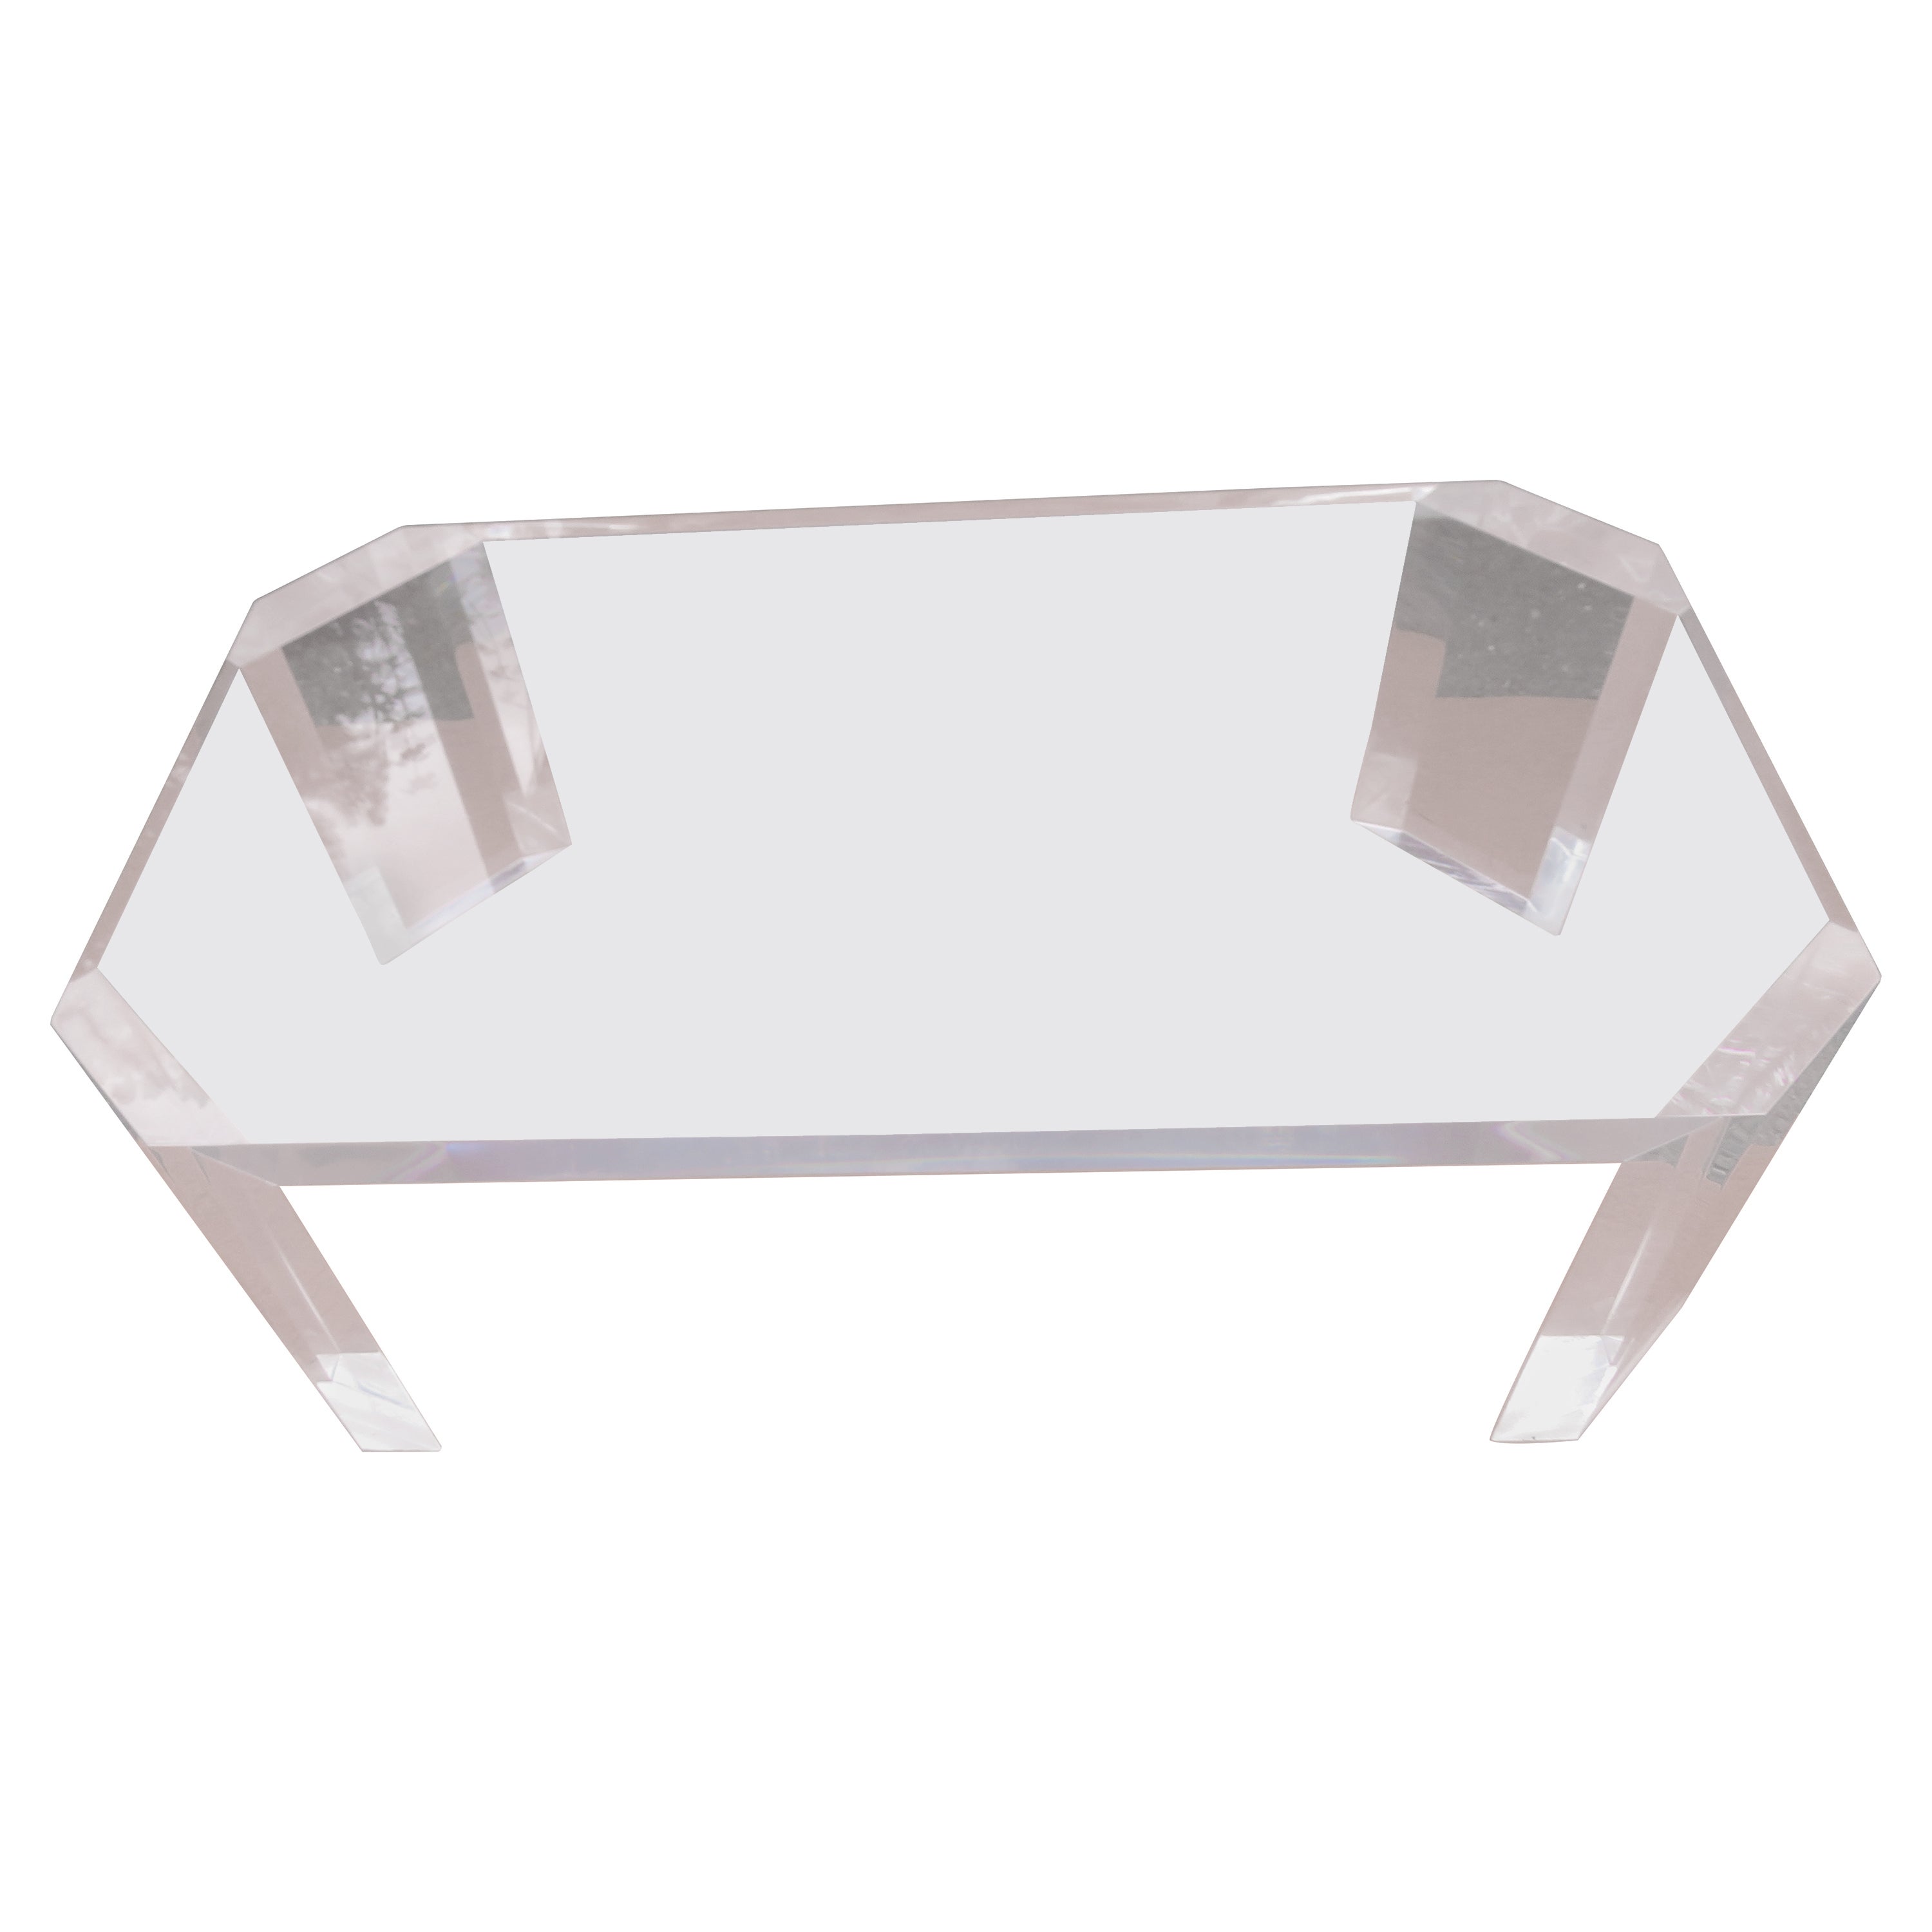 Sparkling Lucite Coffee Table by Charles Hollis Jones "L'AMI"